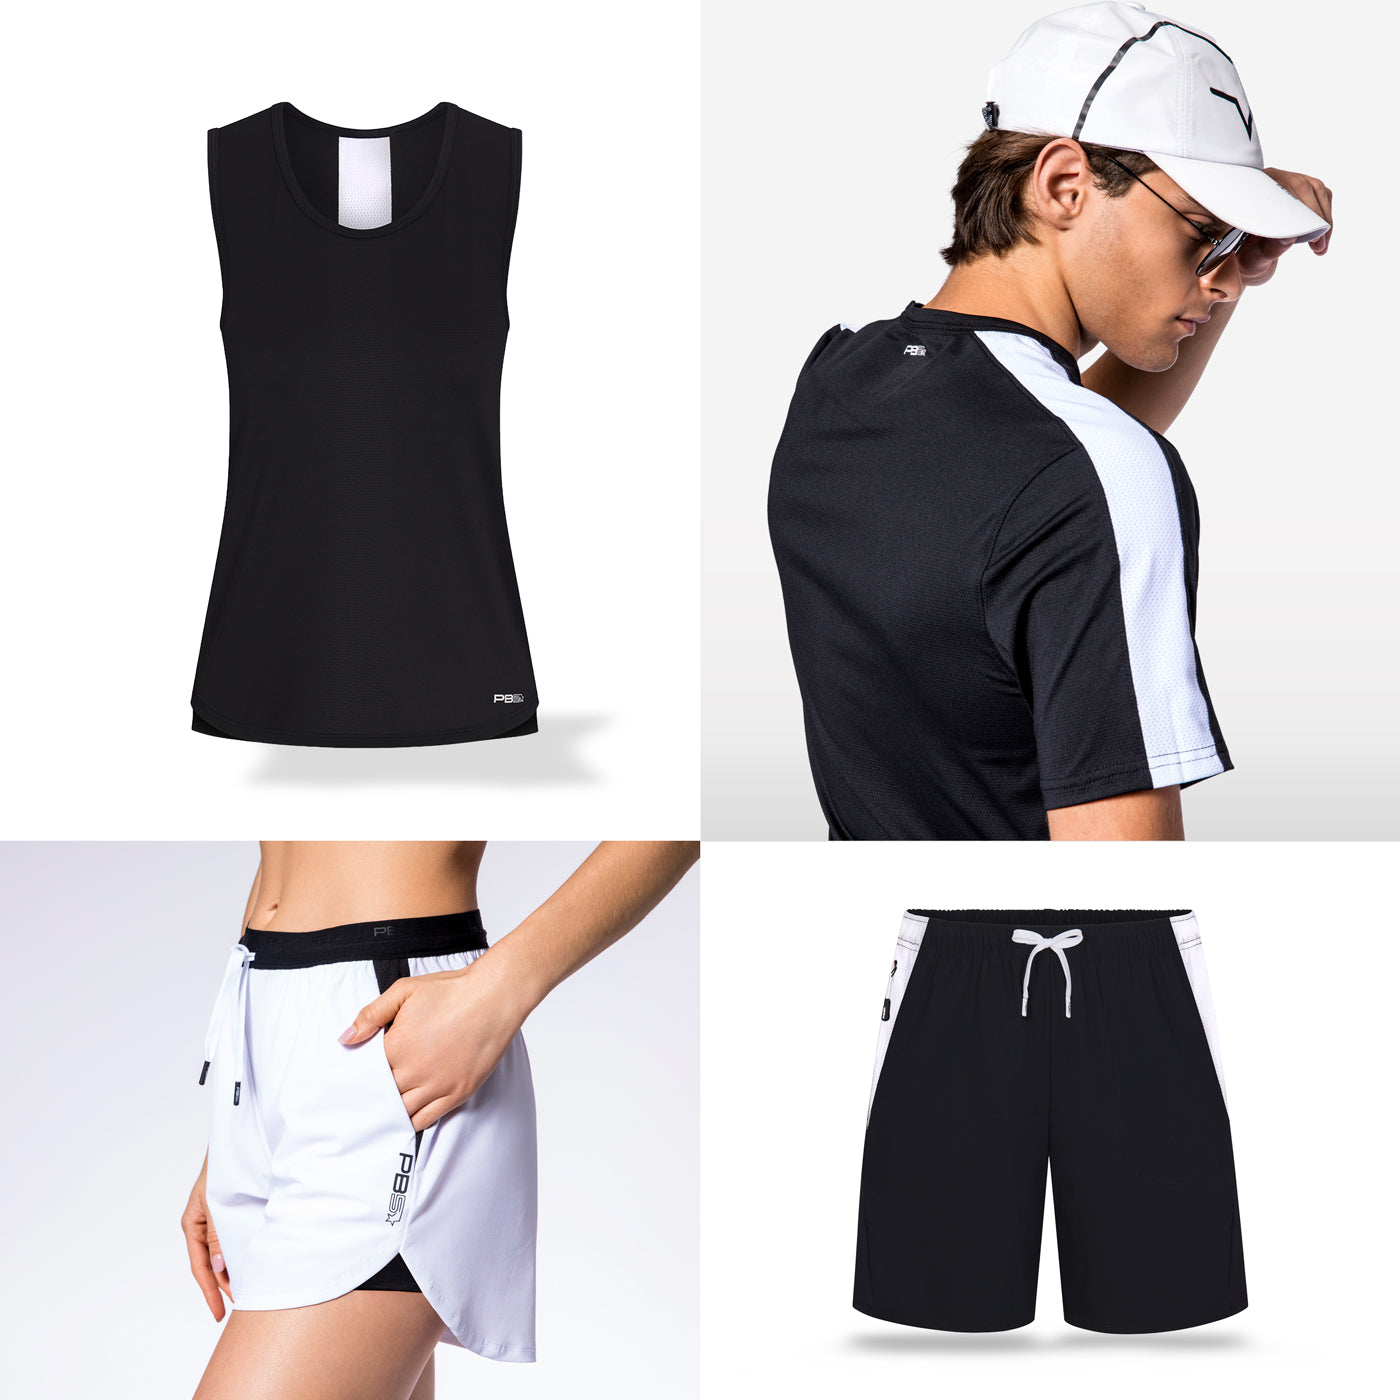 Collage of PB5star athletic wear featuring a black Vented Tank, women's white Signature Court Shorts, male athlete in a white Stellar Pap and black Core Vented Tee, and men's black Vented Court Shorts.